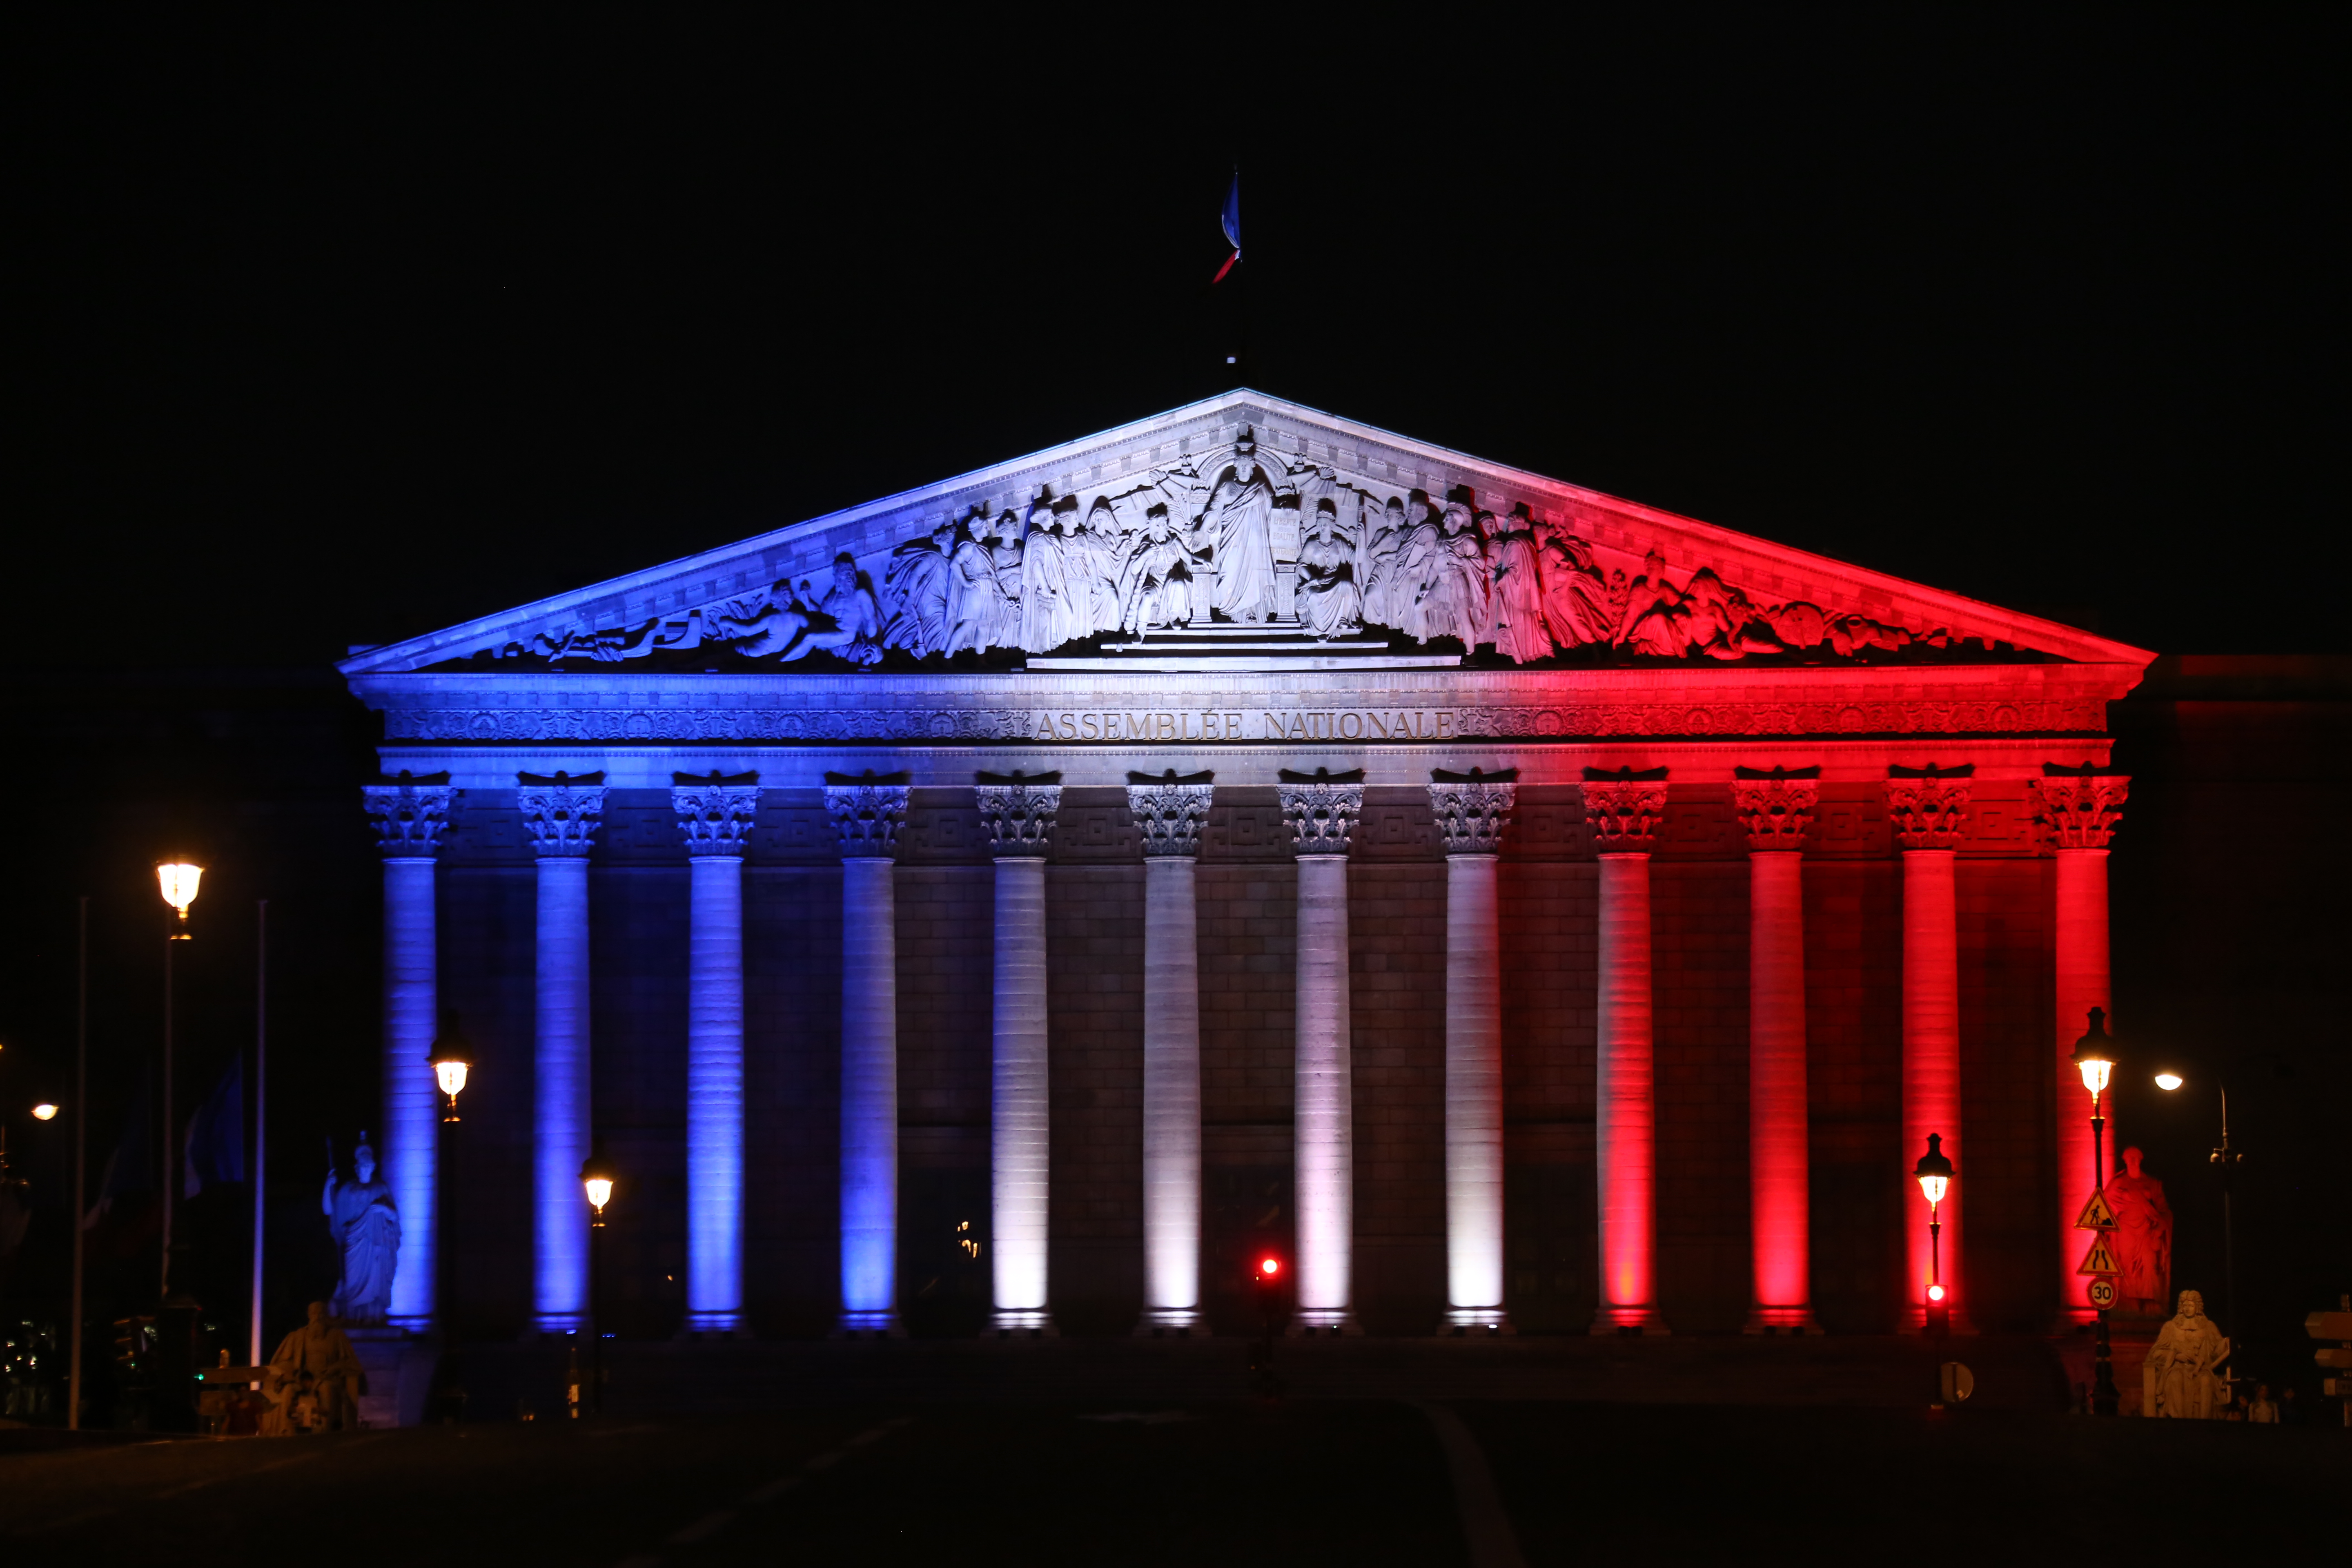 A picture taken on July 26, 2016, shows the National Assembly's palais Bourbon in Paris illuminated in the French flag colours in tribute to the victims of the attack in the Normandy city of Saint-Etienne-du-Rouvray, in which a priest was killed in the city's church, in the latest of a string of attacks against Western targets claimed by or blamed on the Islamic State jihadist group. French President said that two men who attacked a church and slit the throat of a priest had "claimed to be from Daesh", using the Arabic name for the Islamic State group. Police said they killed two hostage-takers in the attack in the Normandy town of Saint-Etienne-du-Rouvray, 125 kilometres (77 miles) north of Paris. / AFP PHOTO / LUDOVIC MARIN